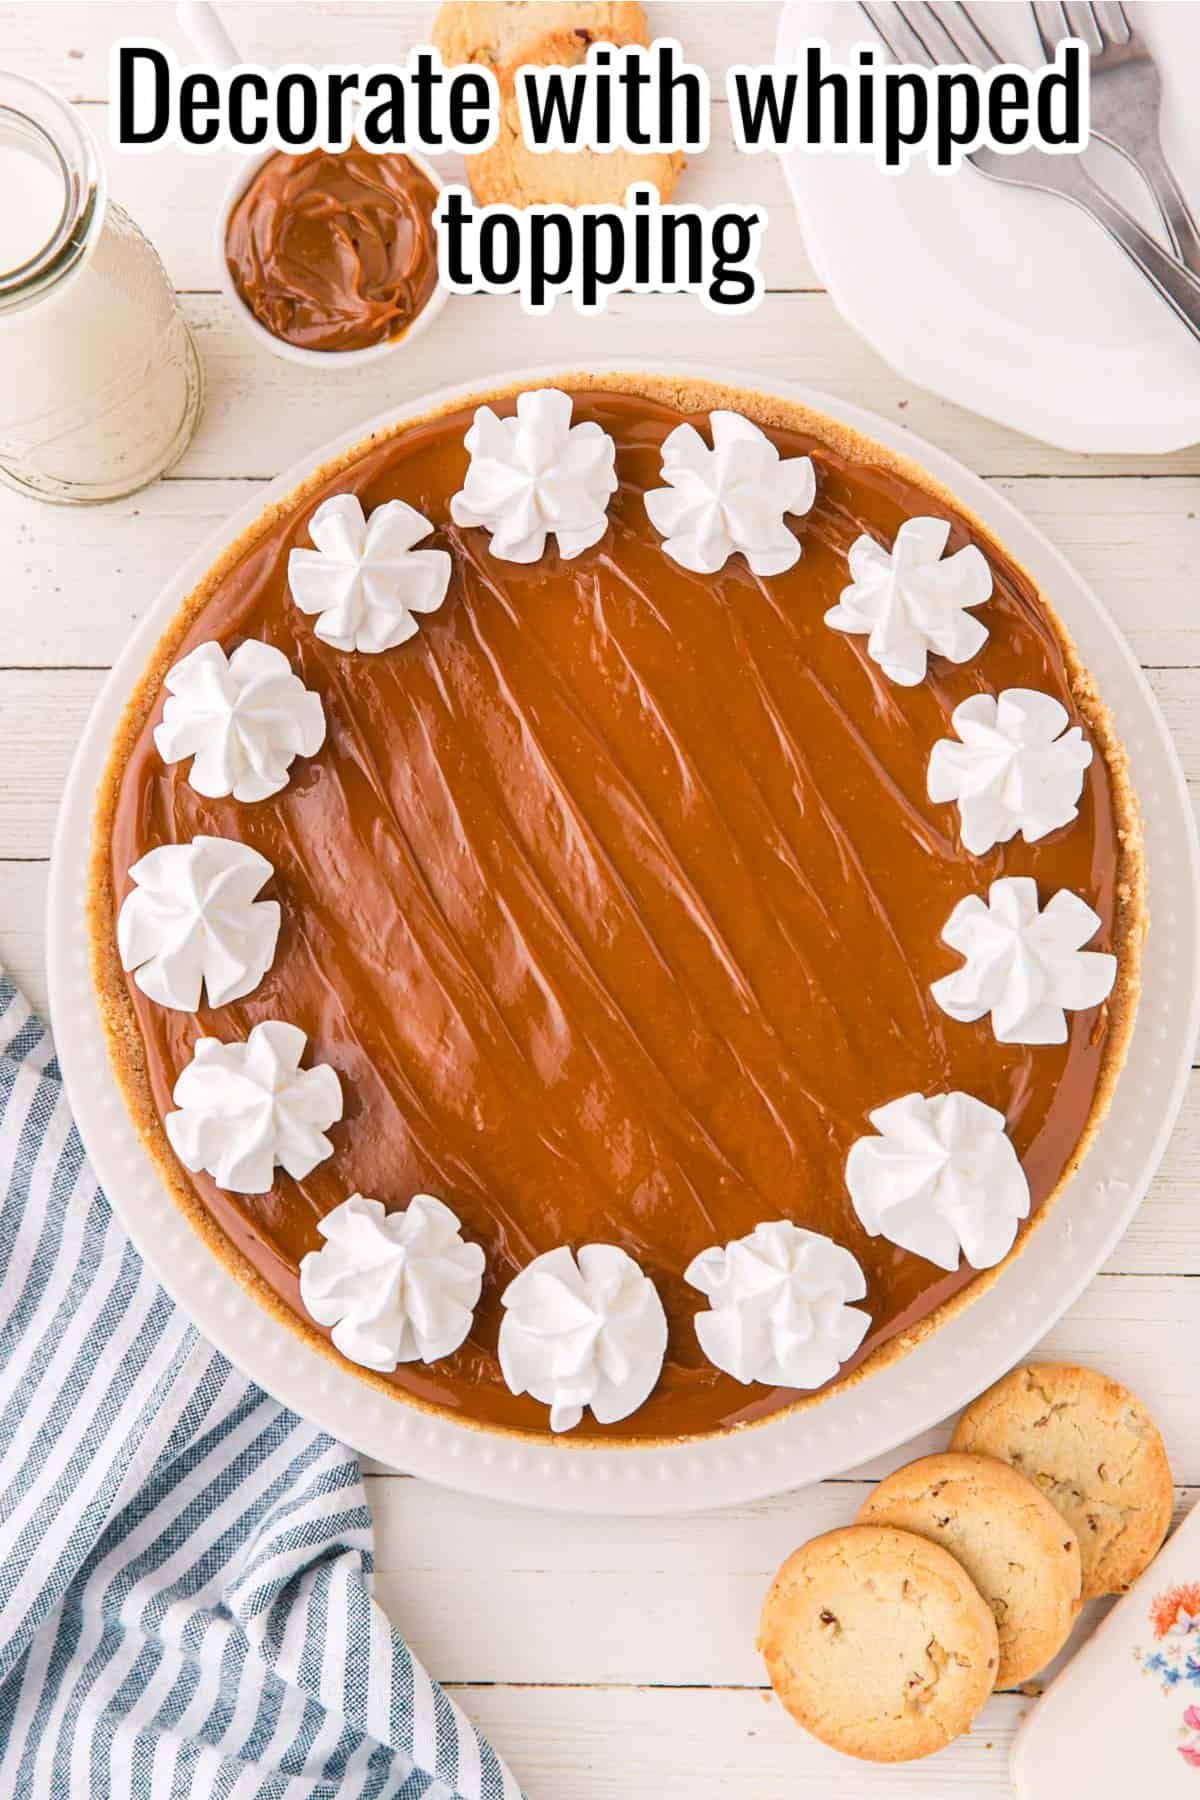 dulce de leche cheesecake with piped whipped topping on top.